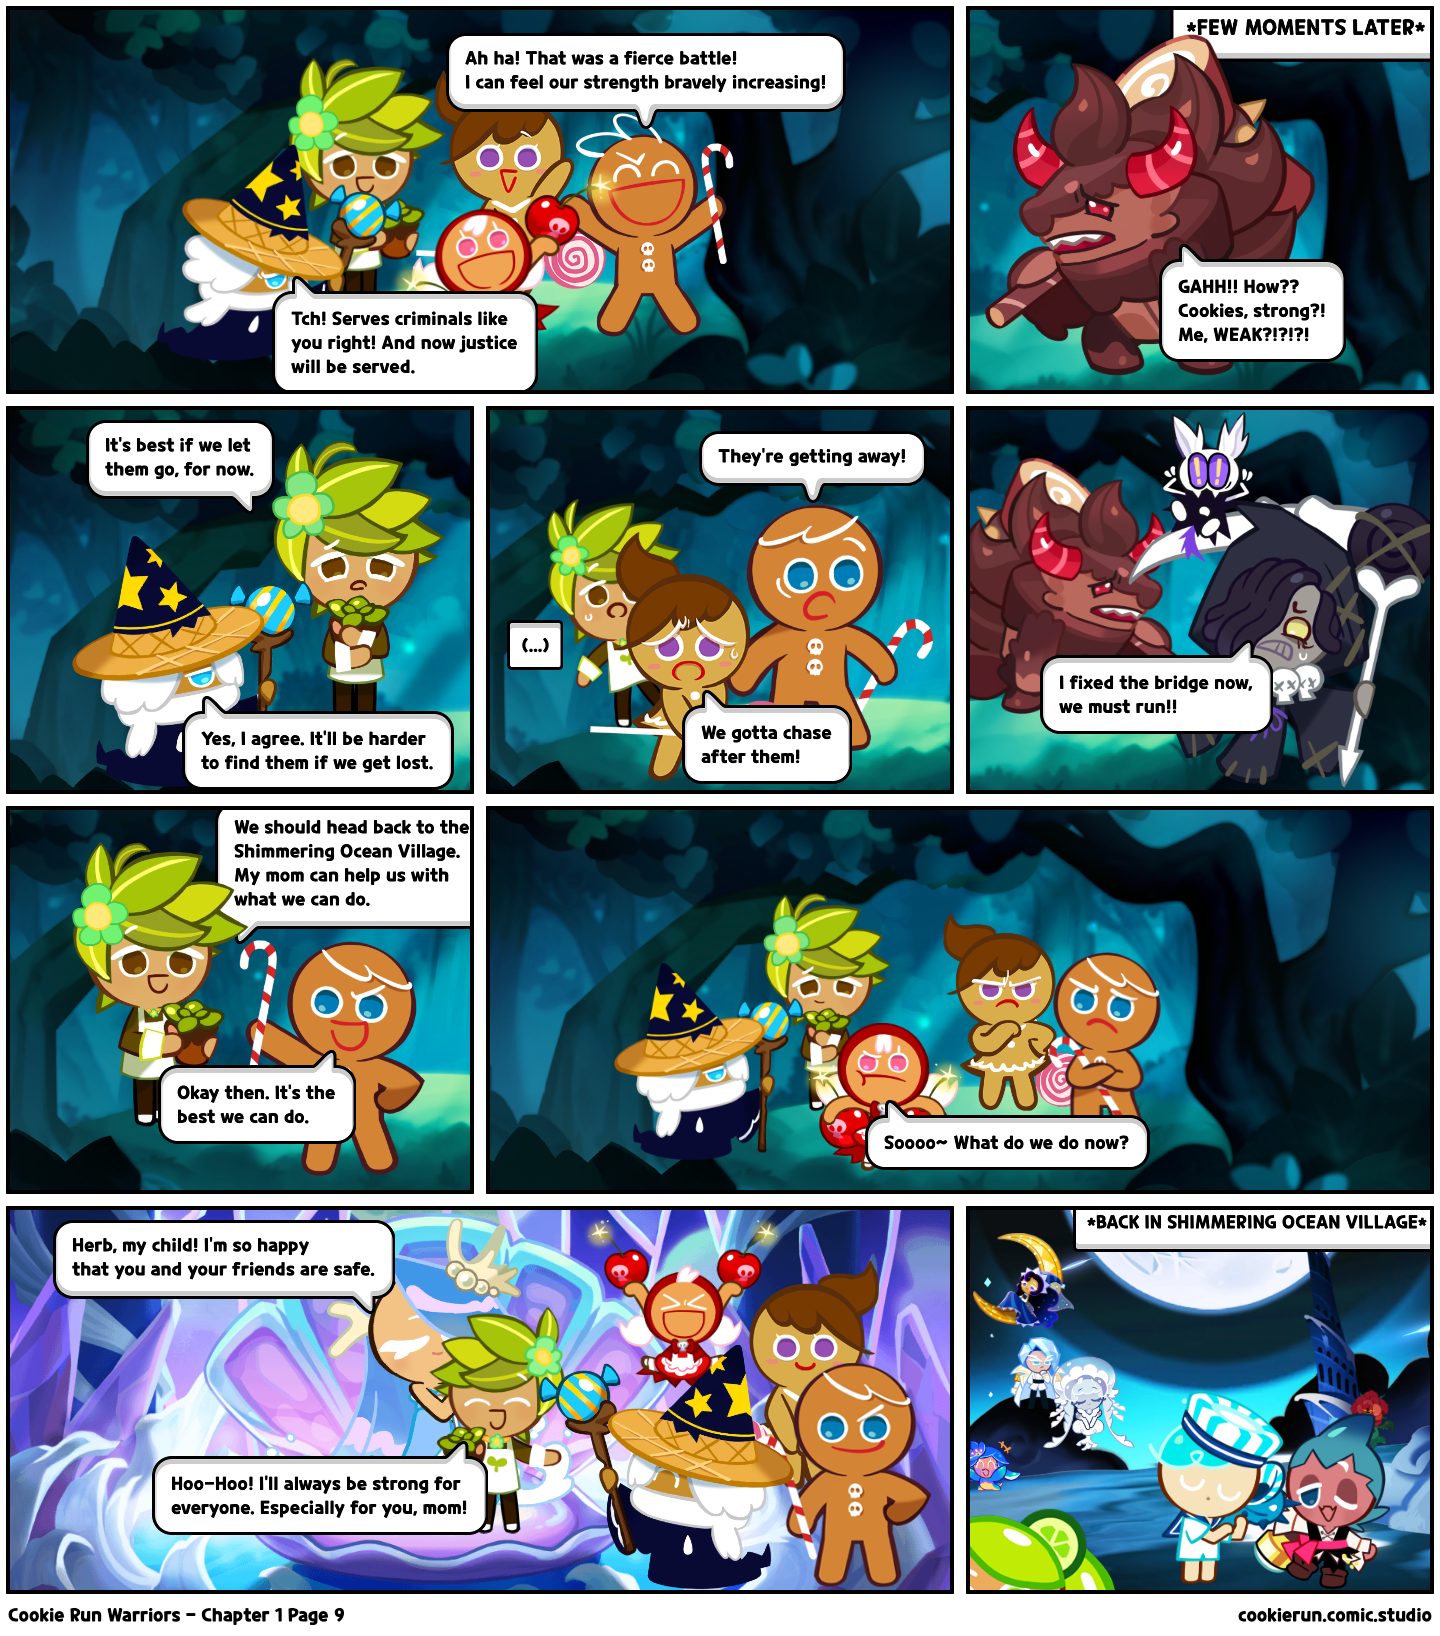 Cookie Run Warriors - Chapter 1 Page 9